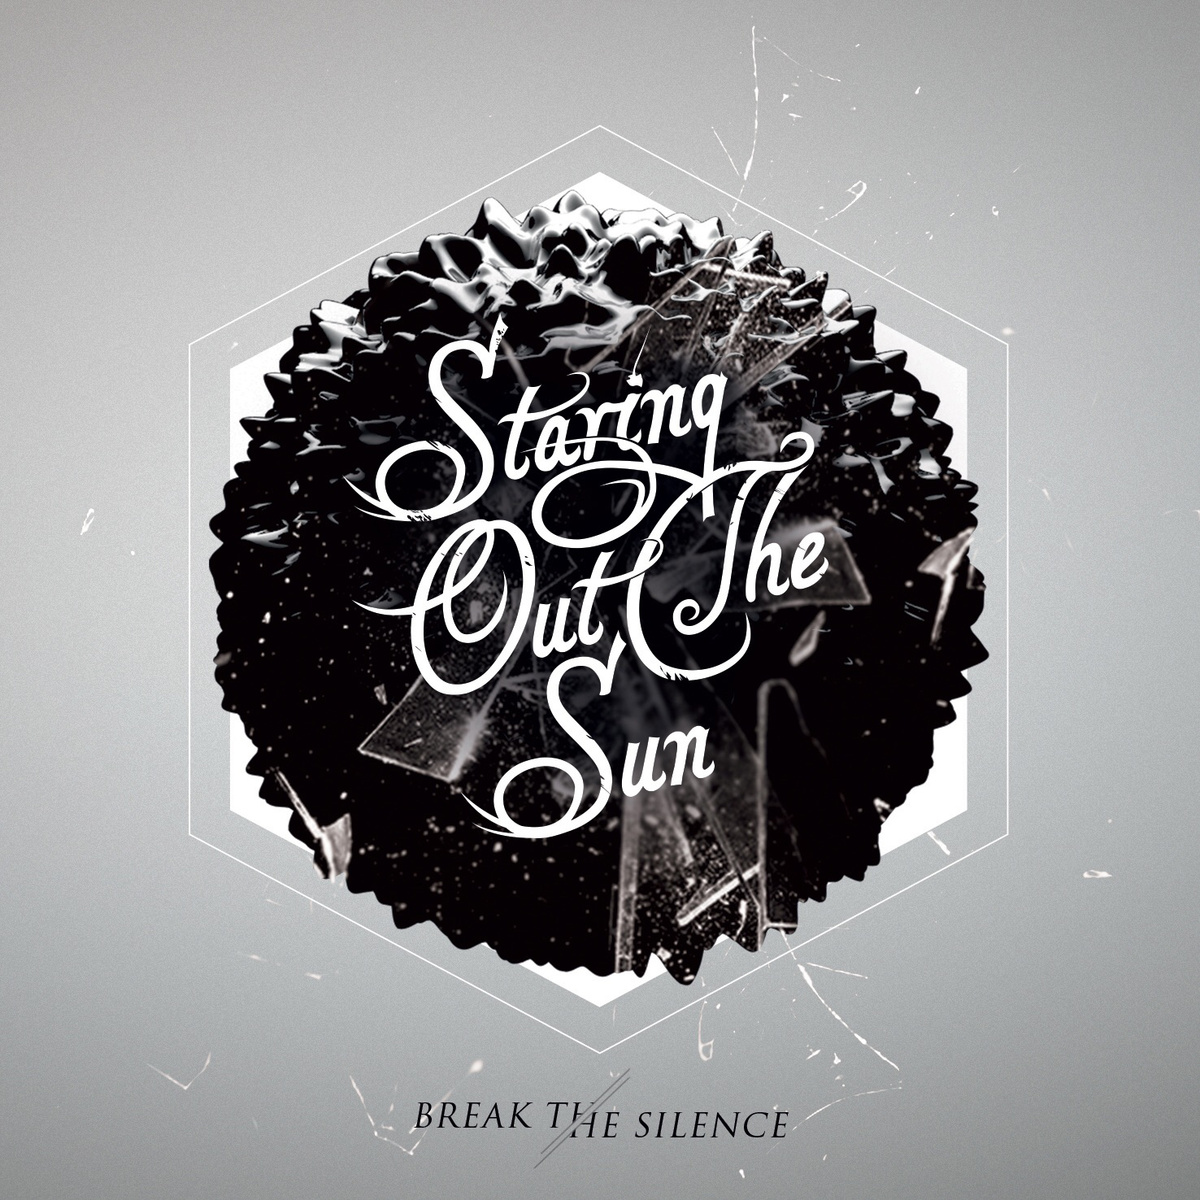  Staring Out The Sun – Break The Silence